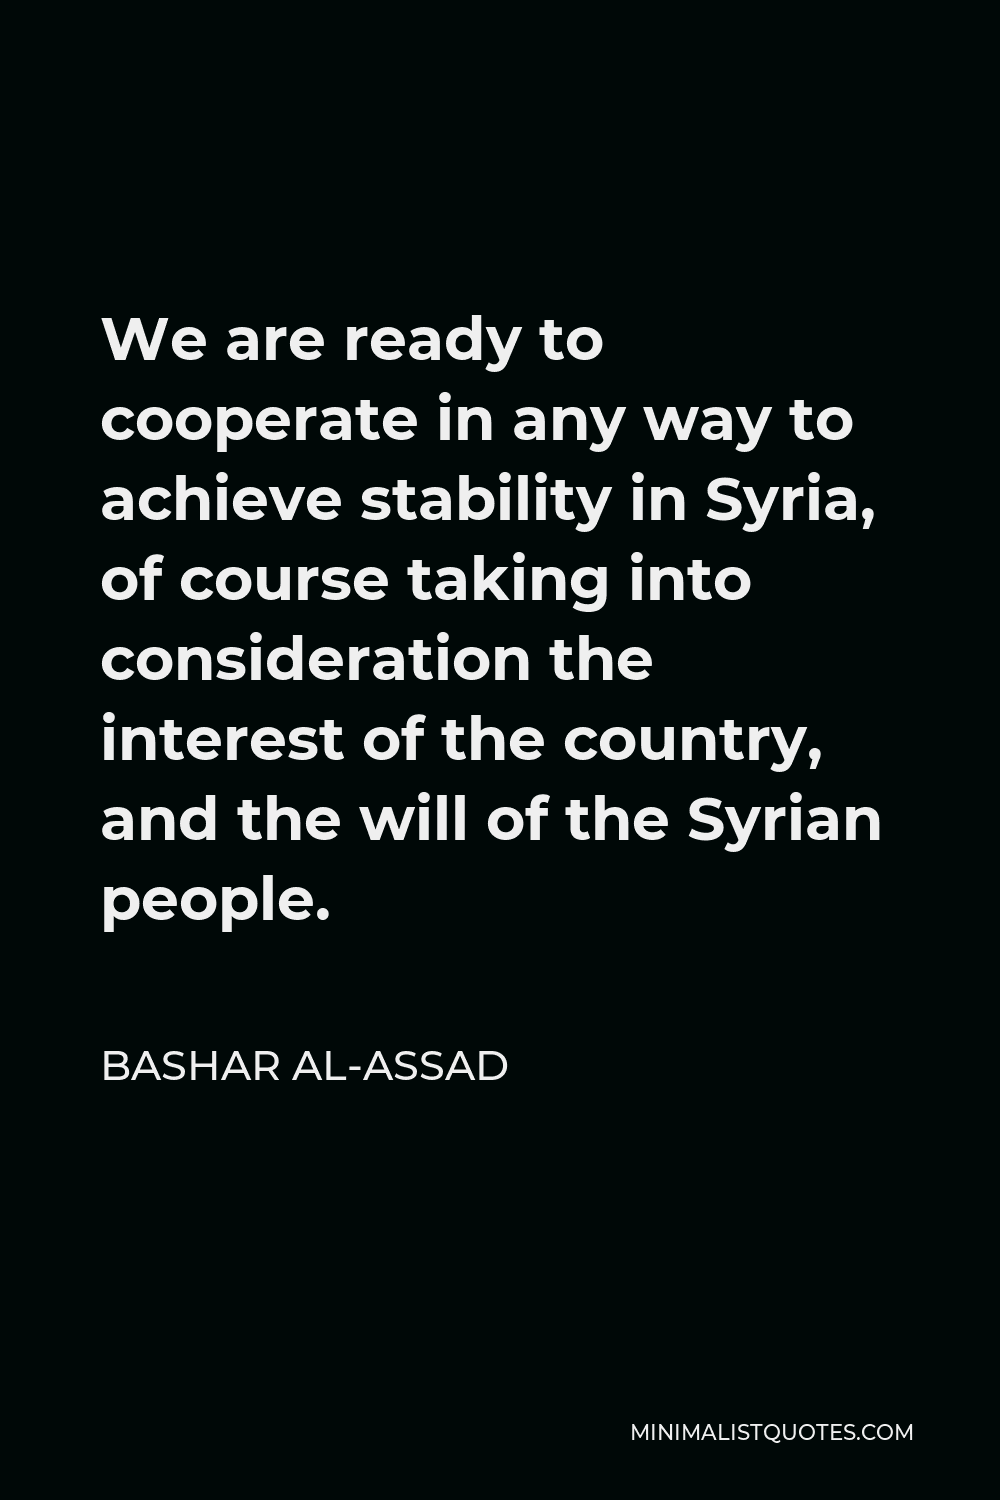 Bashar al-Assad Quote - We are ready to cooperate in any way to achieve stability in Syria, of course taking into consideration the interest of the country, and the will of the Syrian people.